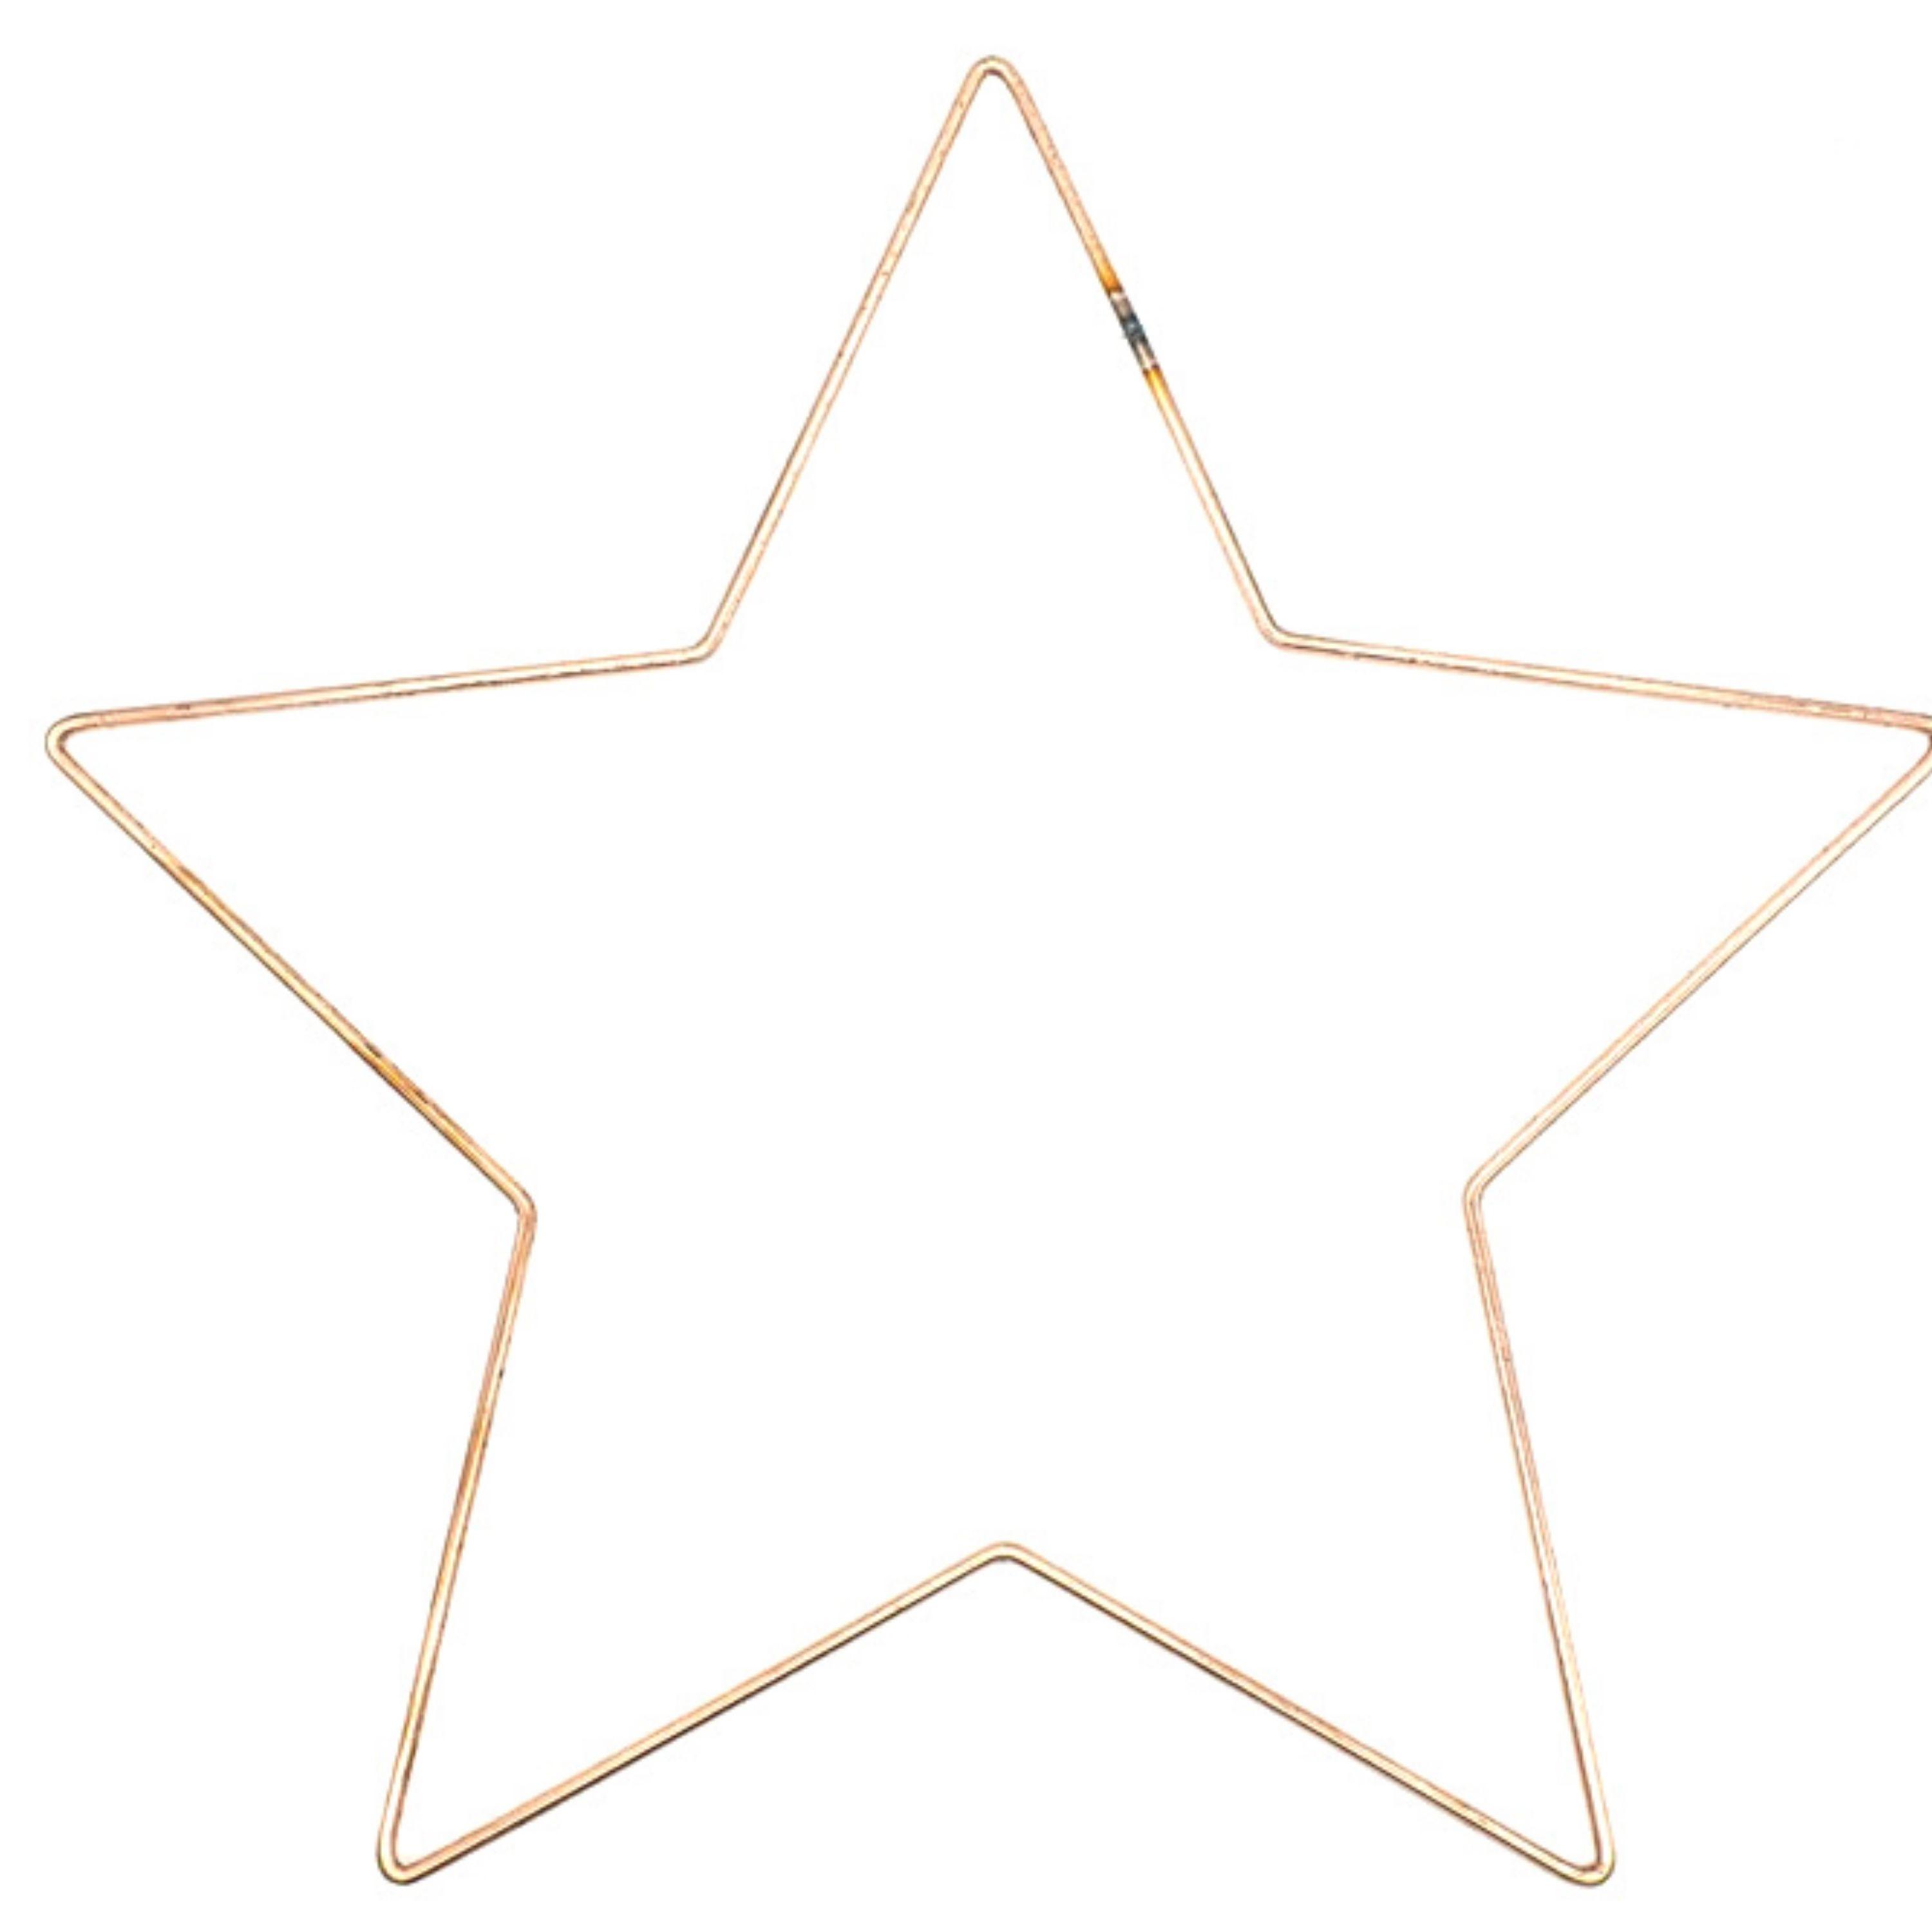 16" metal wire star